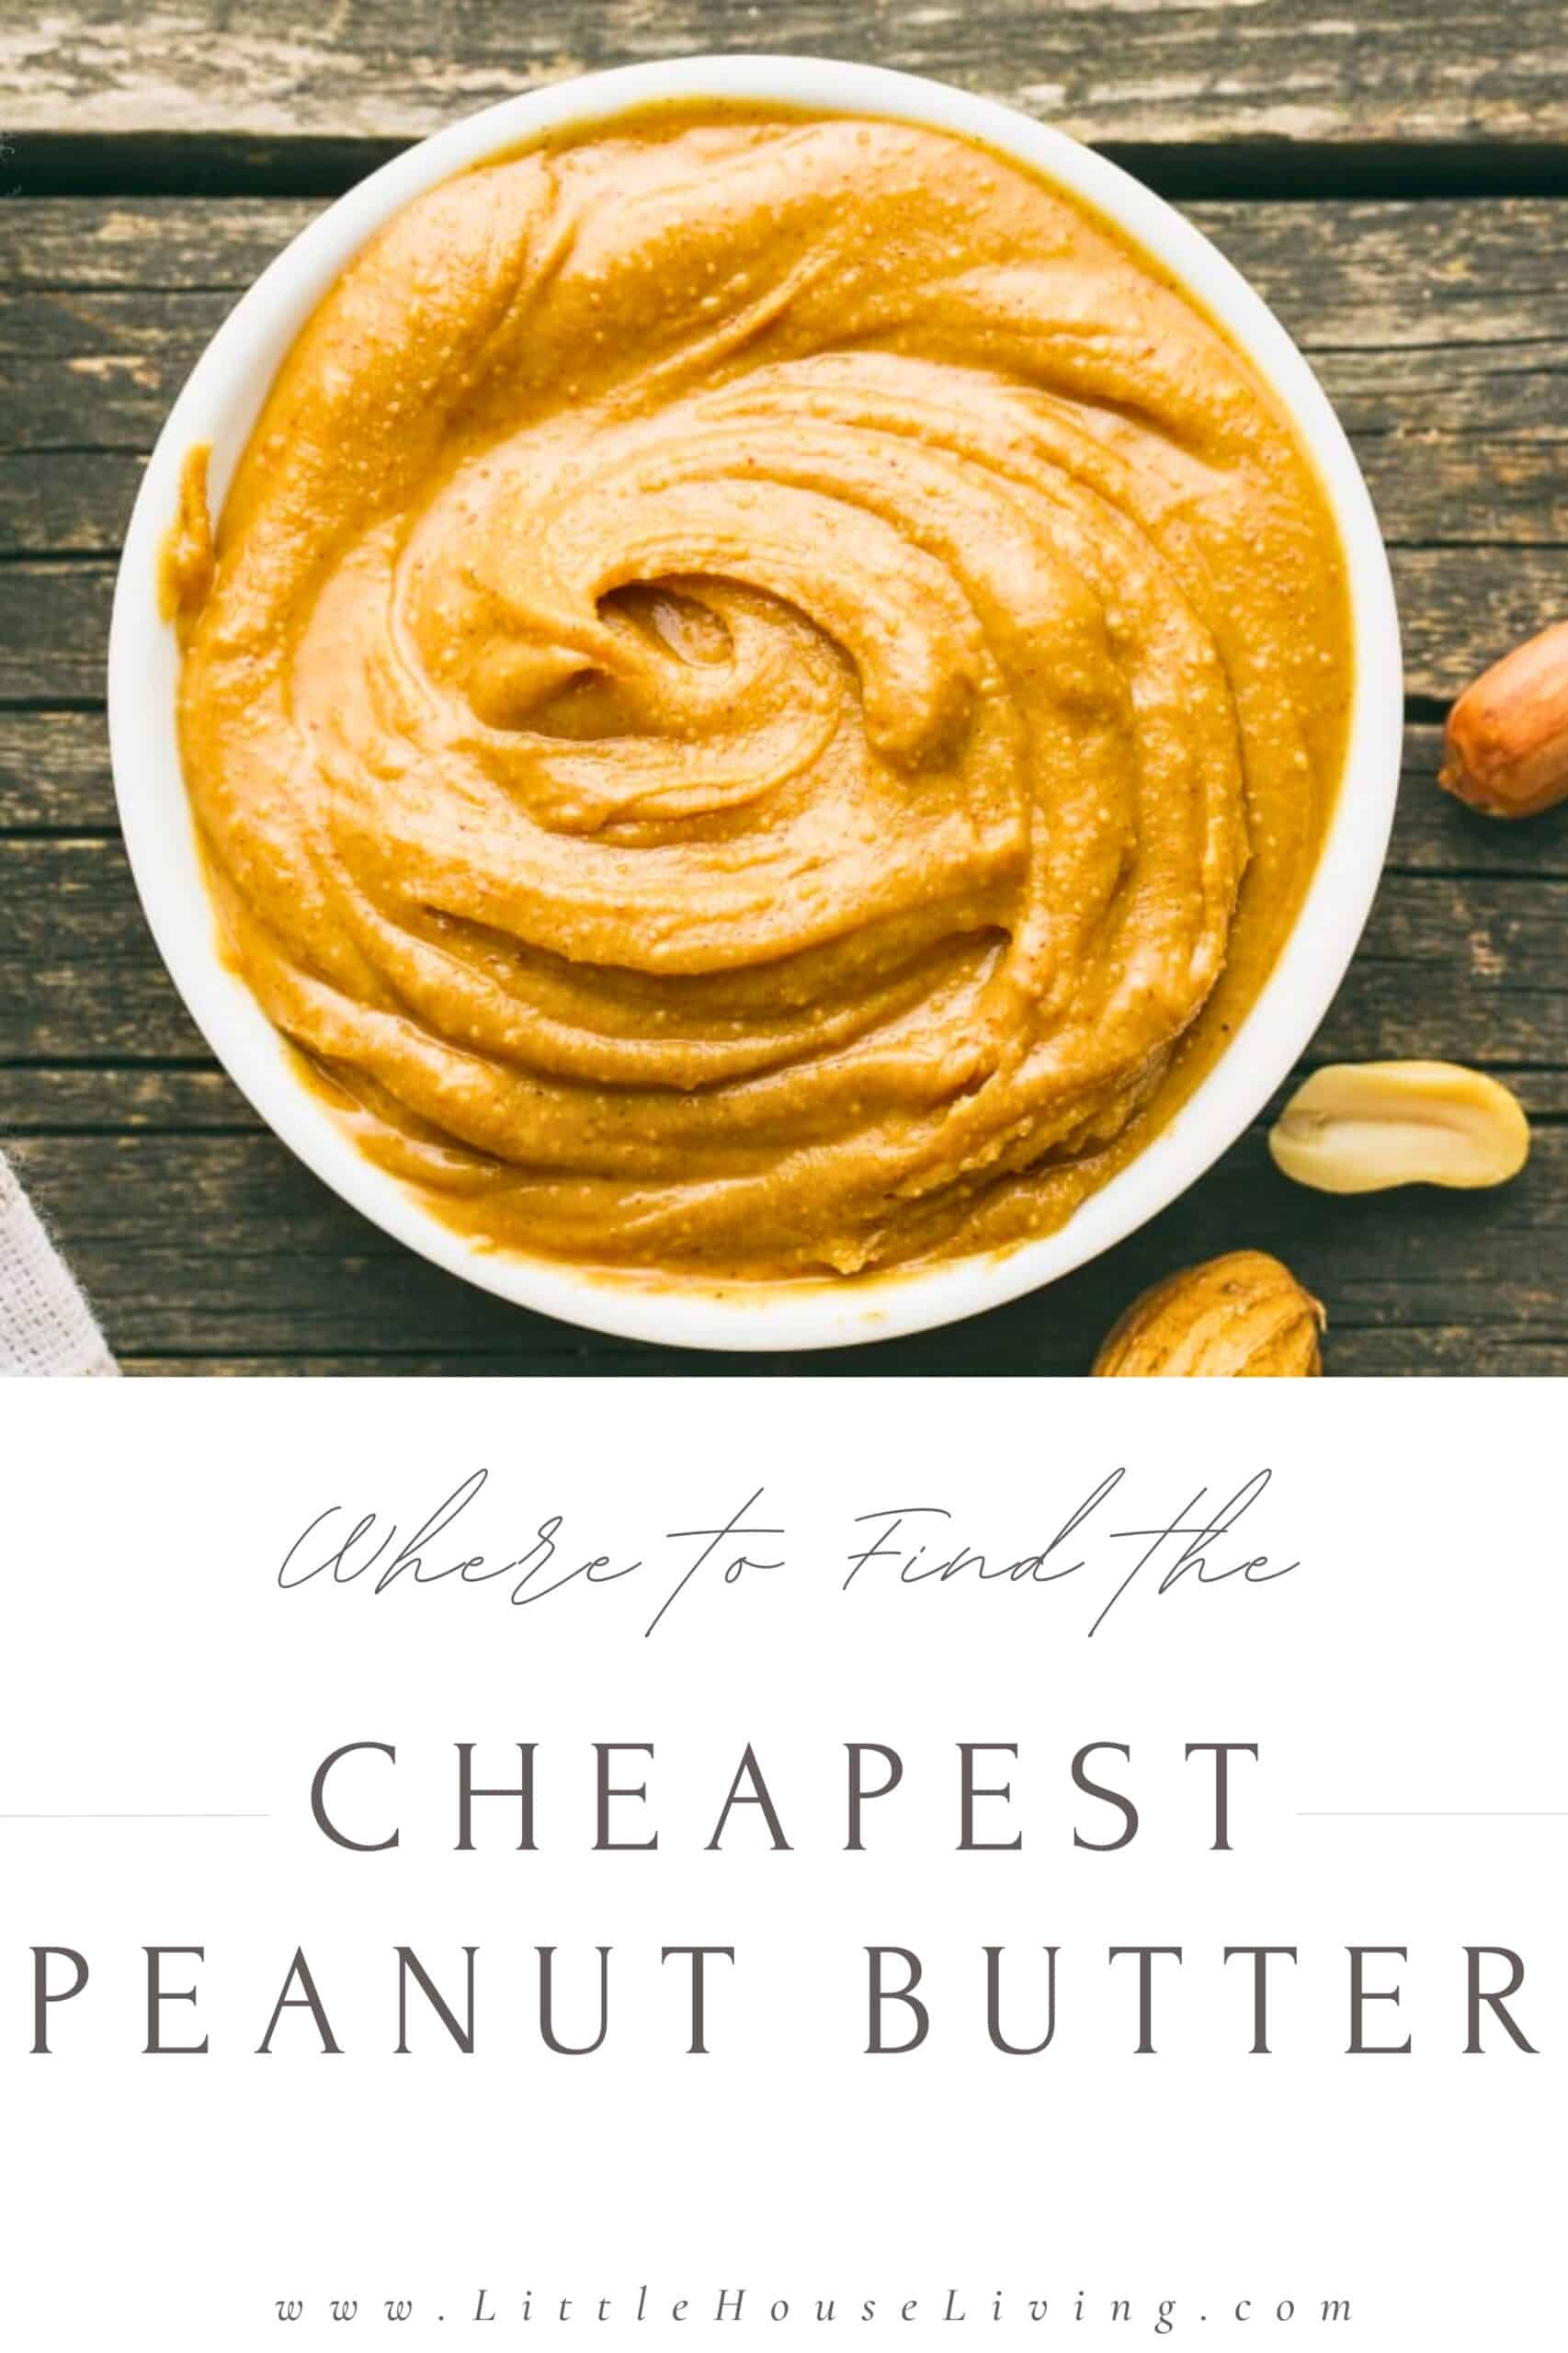 Love peanut butter but hate the high prices? Here are some great ideas on how to save on peanut butter!